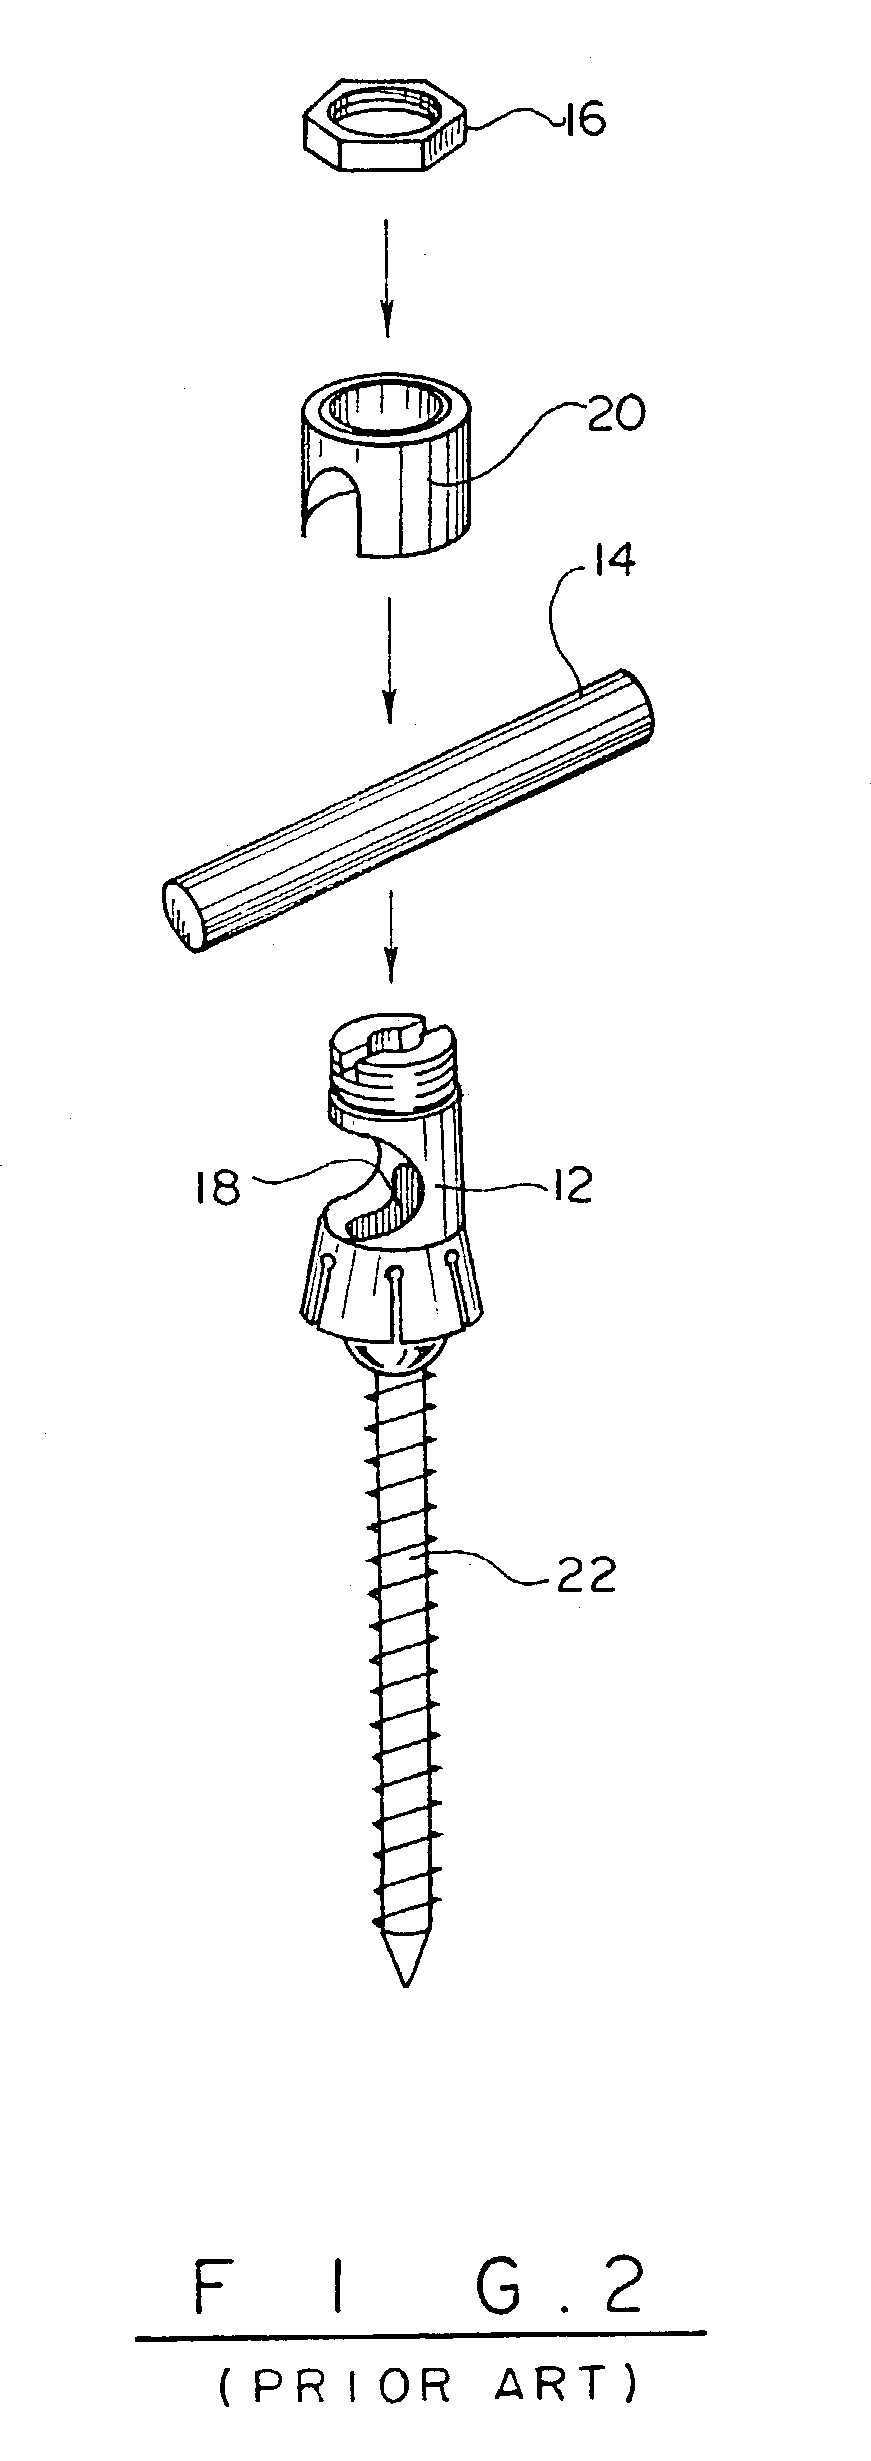 Device and method for percutaneous placement of lumbar pedicle screws and connecting rods